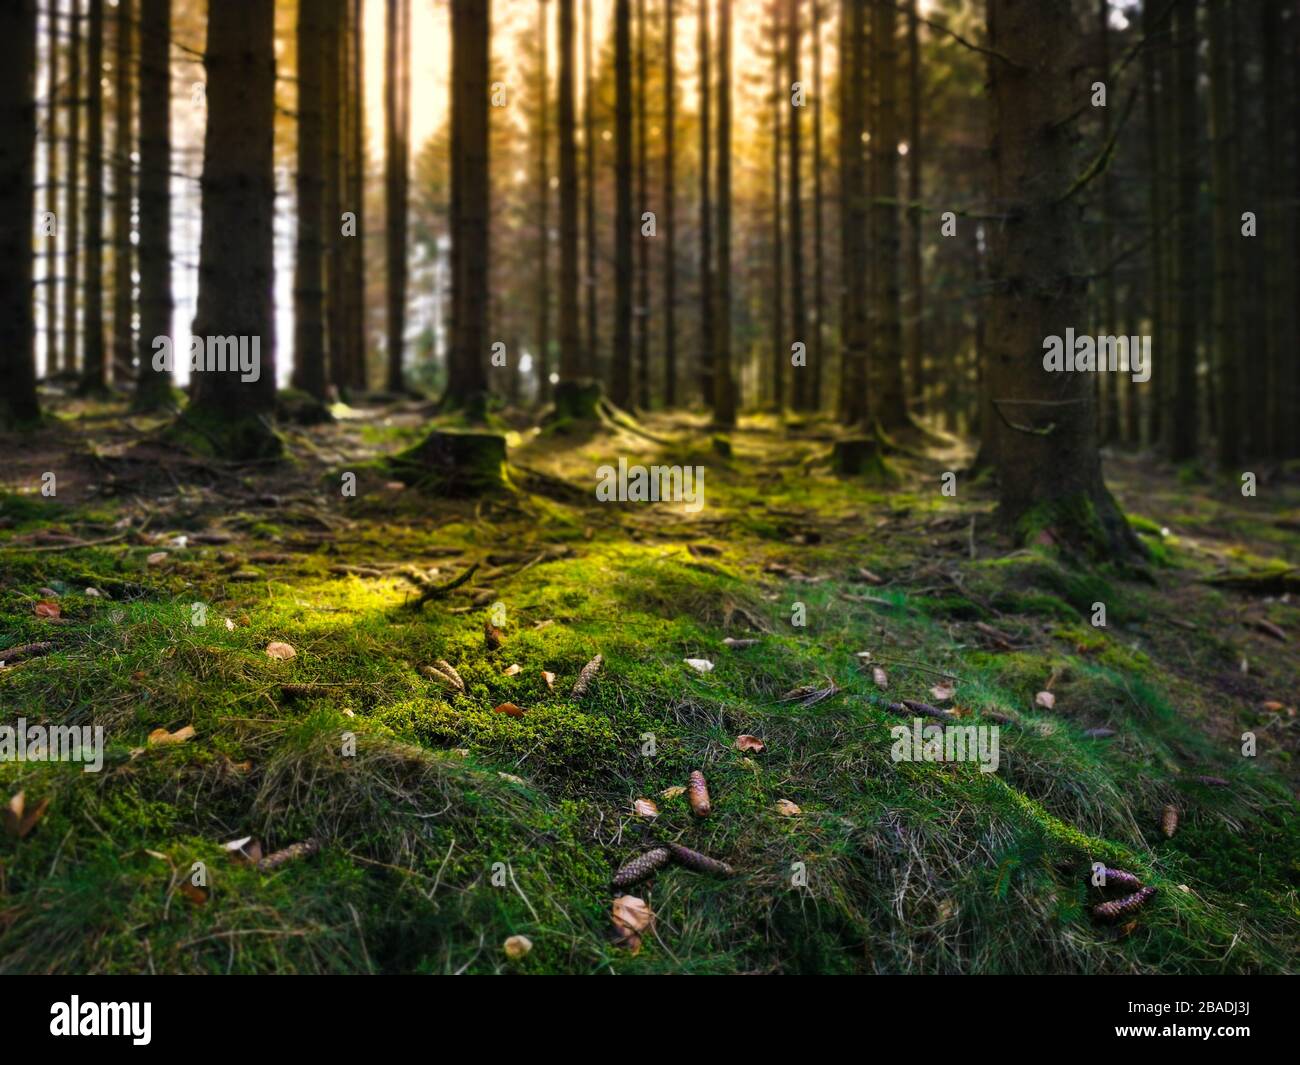 Moist forest floor with moss. The tree trunks cast shadows in the sunlight. A good place for forest bathing. Brilon, Sauerland. Stock Photo